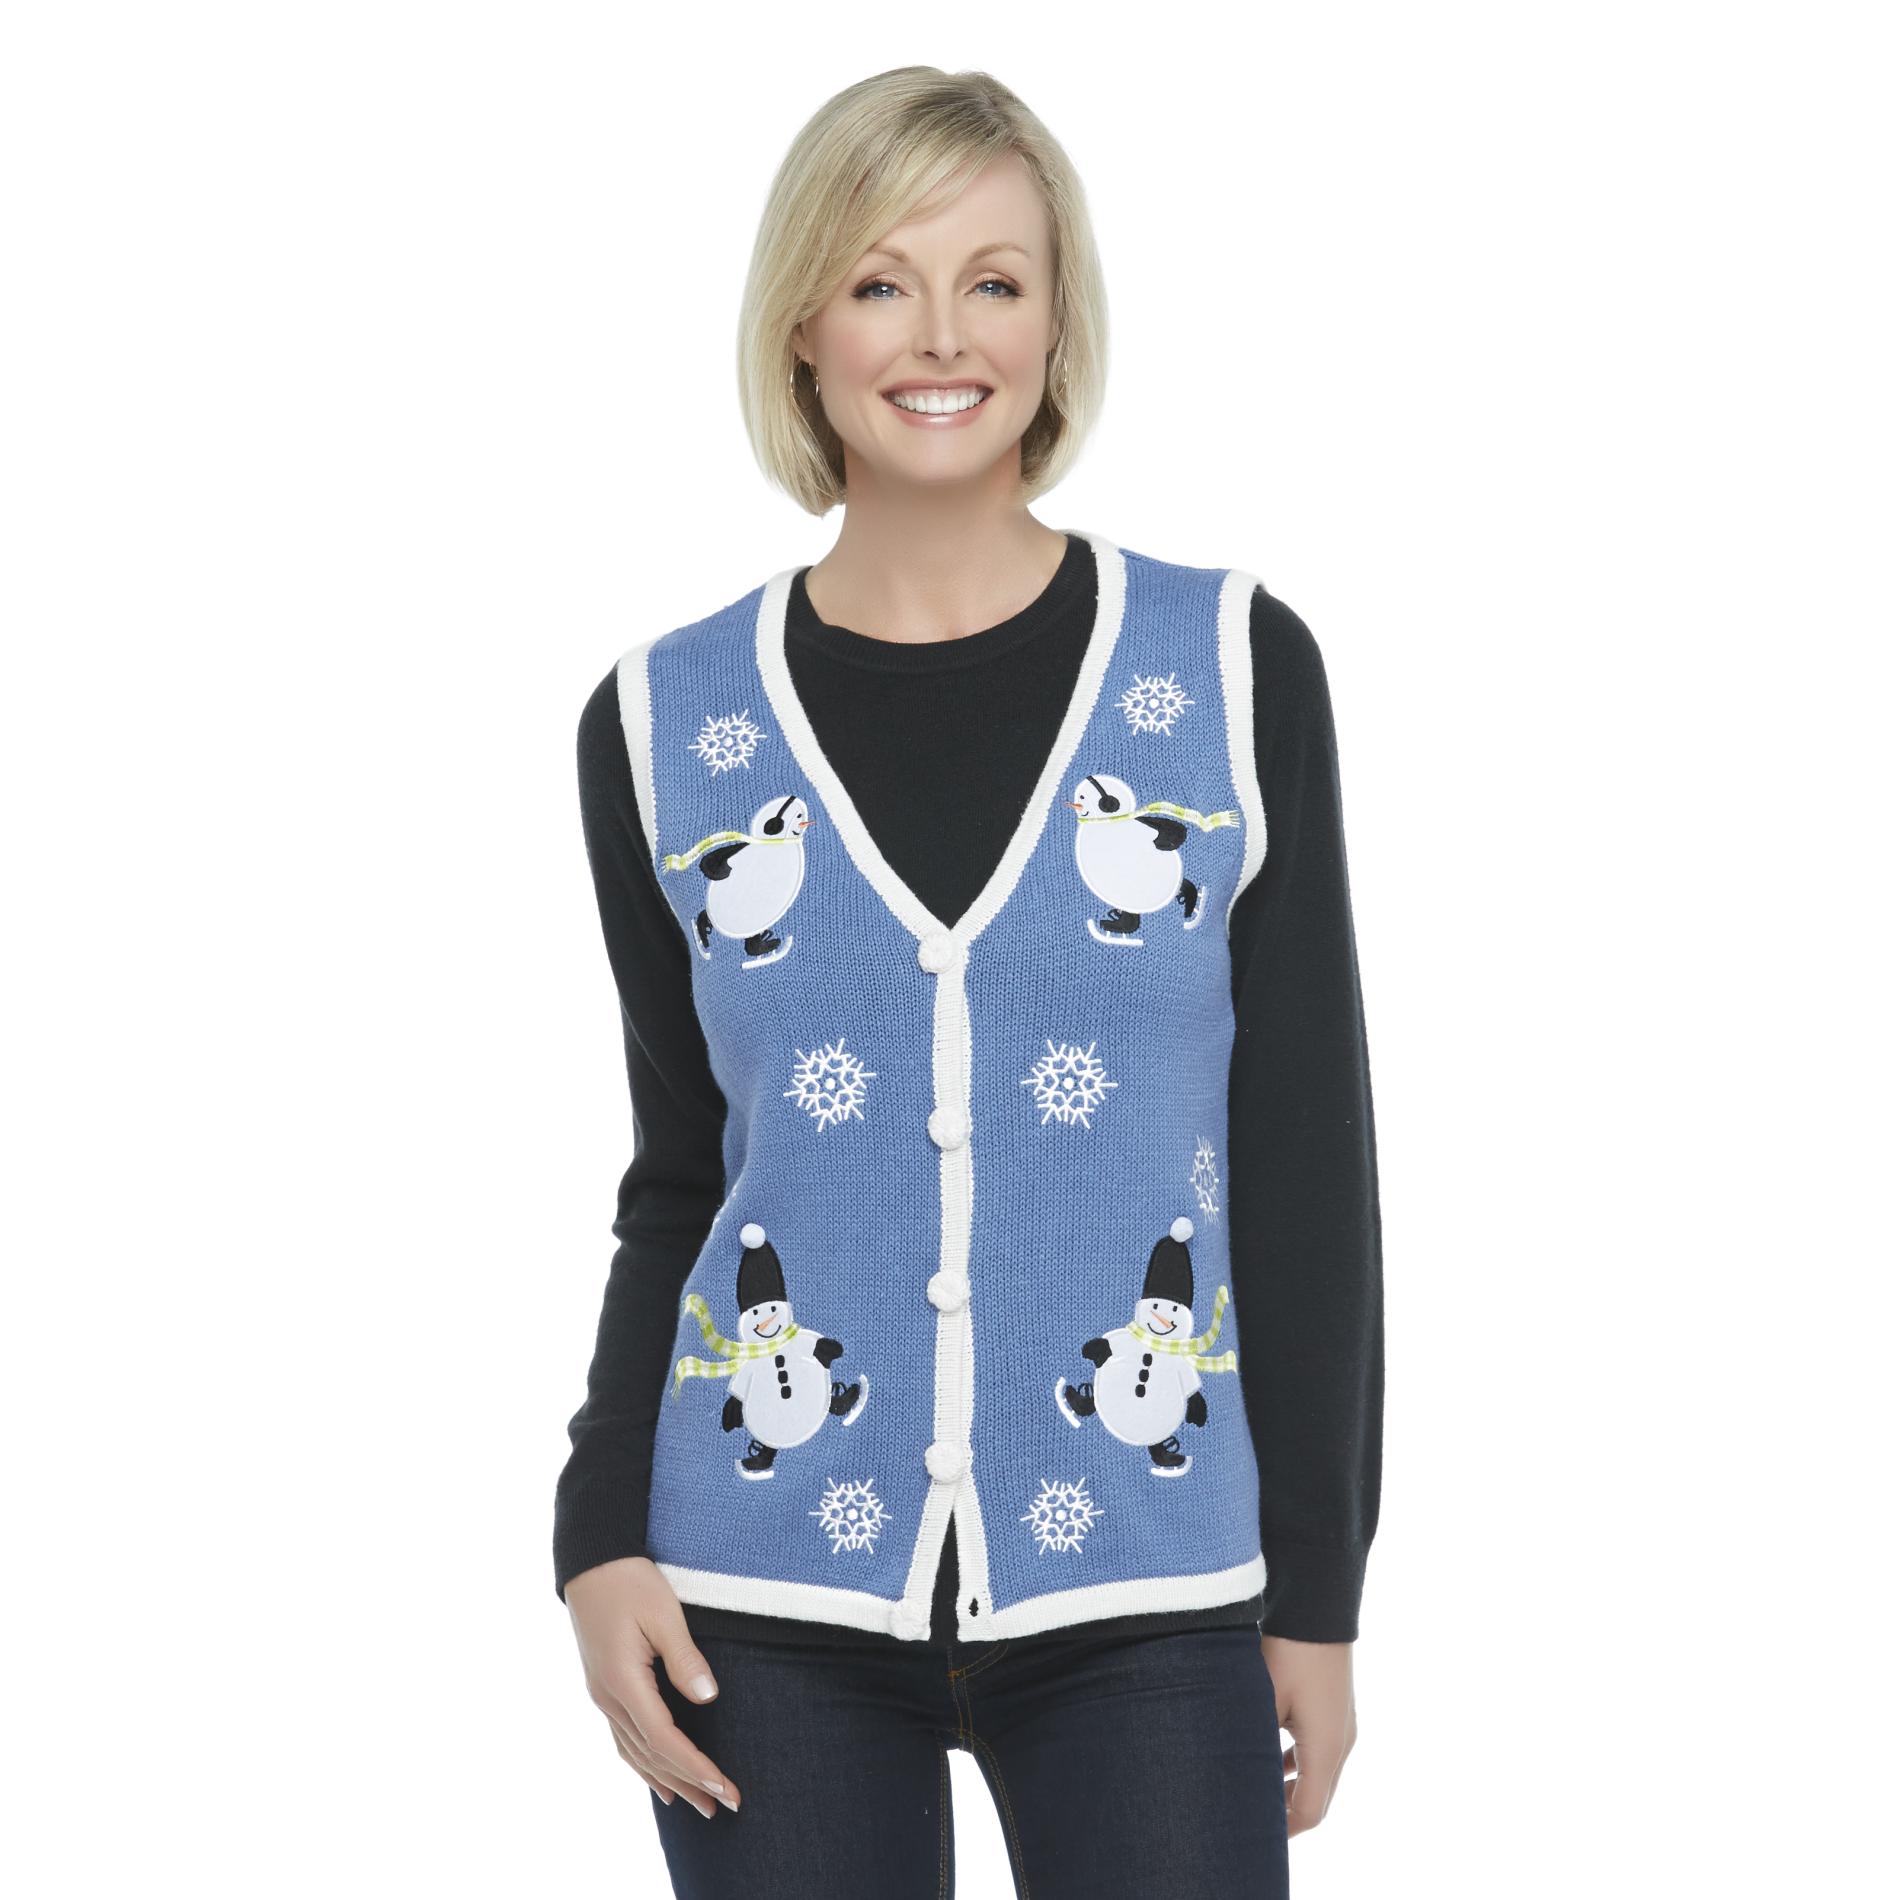 Holiday Editions Women's Sweater Vest - Christmas Snowmen & Snowflakes